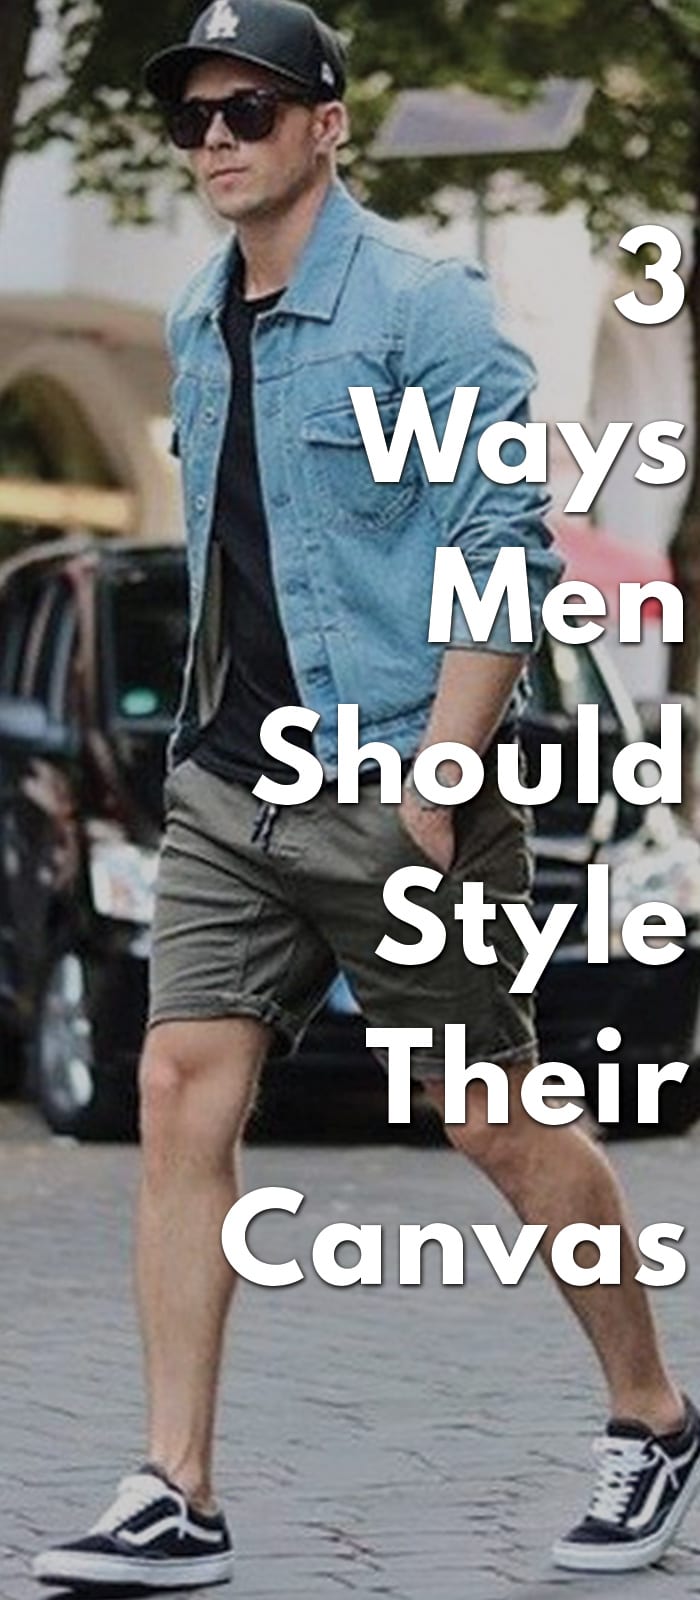 3-Ways-Men-Should-Style-Their-Canvas